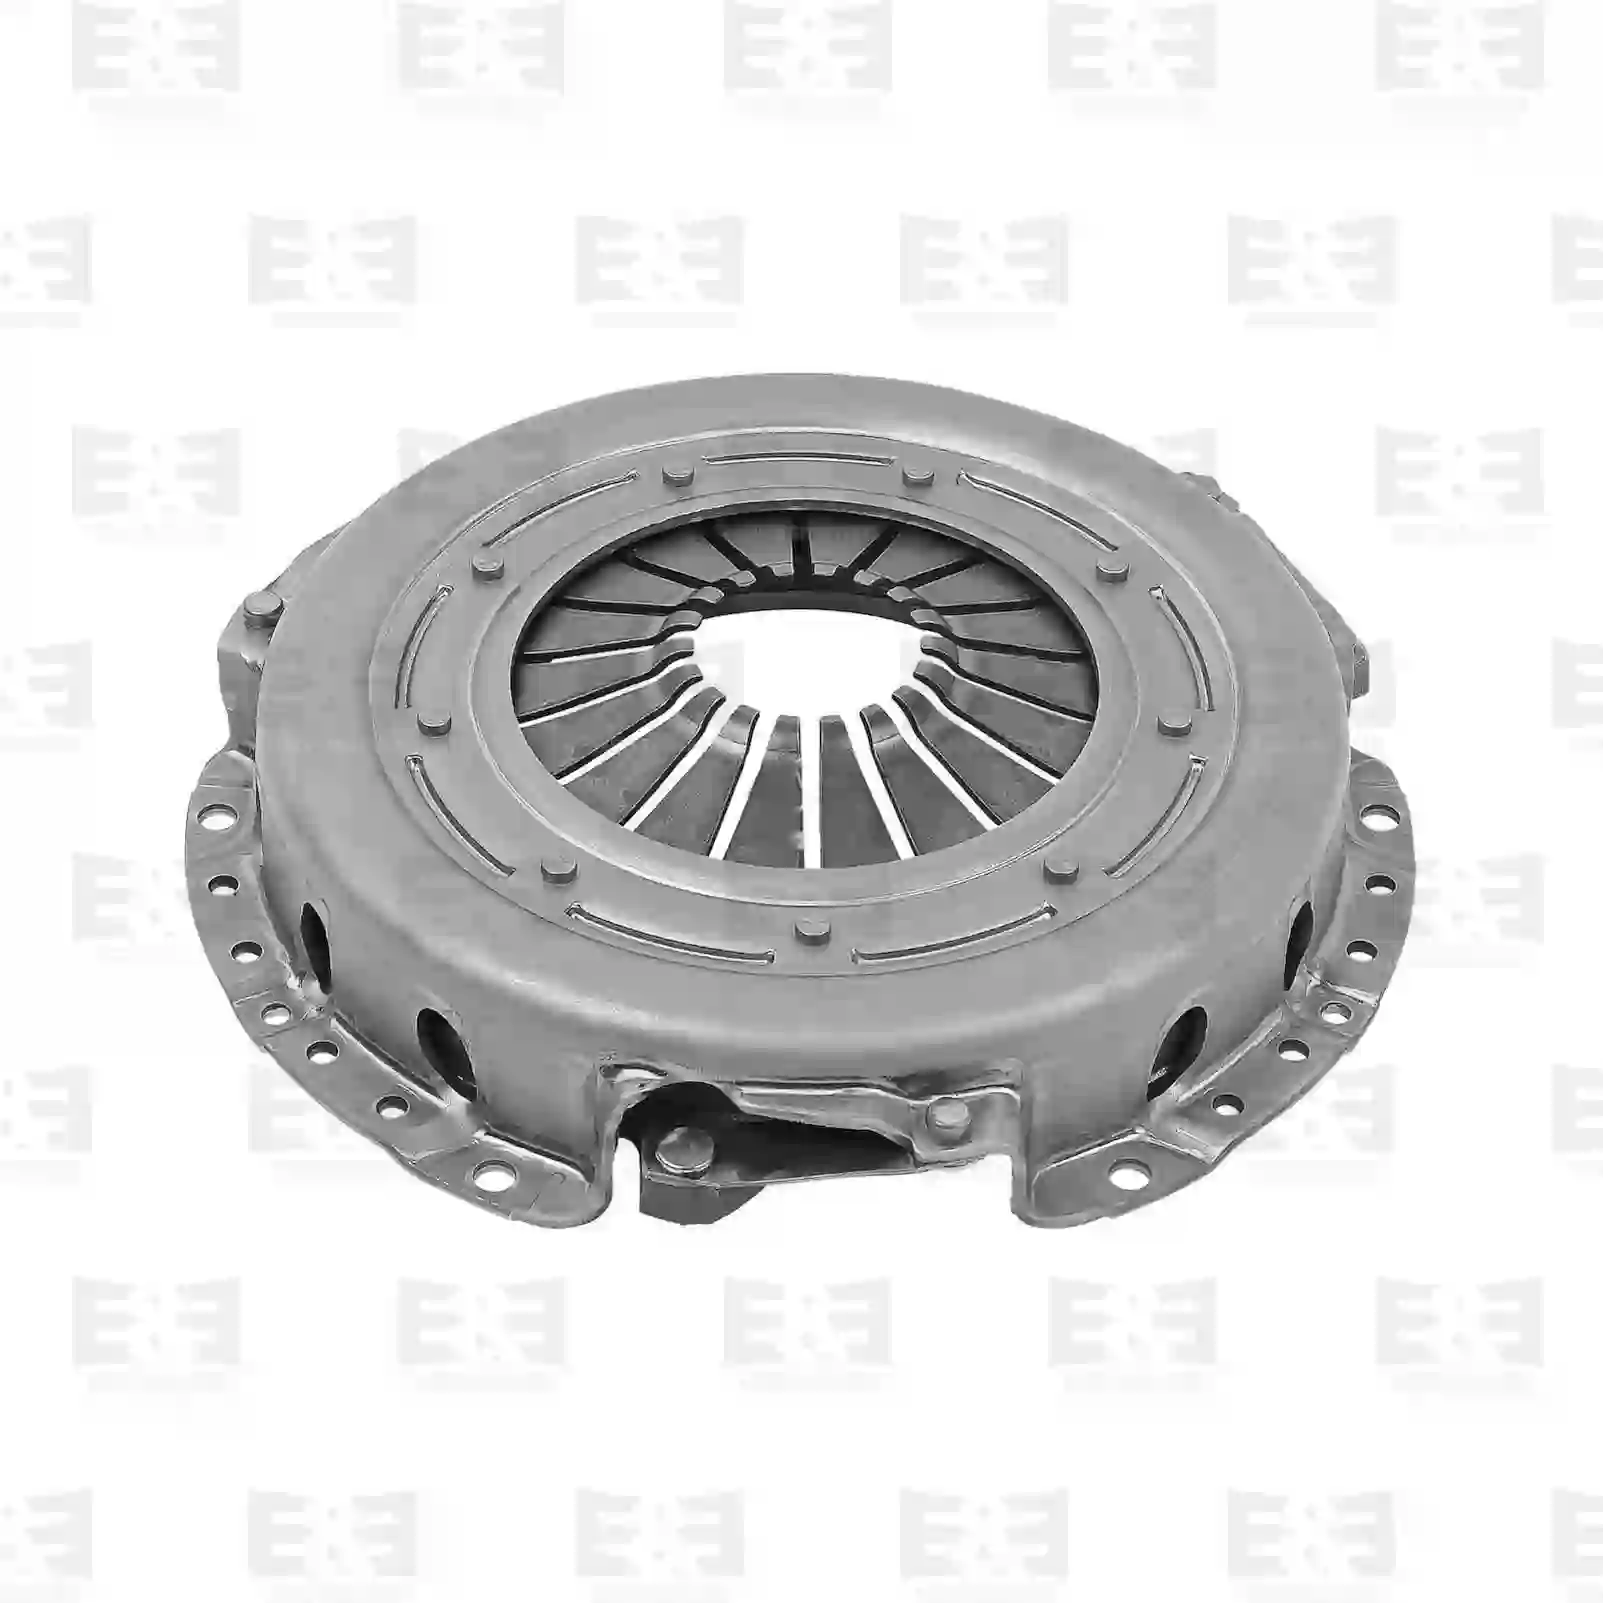  Clutch Kit (Cover & Disc) Clutch cover, EE No 2E2288002 ,  oem no:7932568012, 9350146080, 04745051, 1475197, 1494880, 1518419, 1518960, 1555837, 1579980, 1602085, 1608612, 1645280, 1645297, 5001306, 5002960, 5002961, 5012192, 5019059, 5029570, 5029575, 5050634, 6099571, 6100324, 6104431, 6104432, 6106045, 6120888, 6151999, 6171011, 6177288, 6188558, 6973999, 88GB-7563-AA, 89GB-7563-AA, 89GB-7563-AB, 7932568012, 9350146080, GCP228 E&E Truck Spare Parts | Truck Spare Parts, Auotomotive Spare Parts